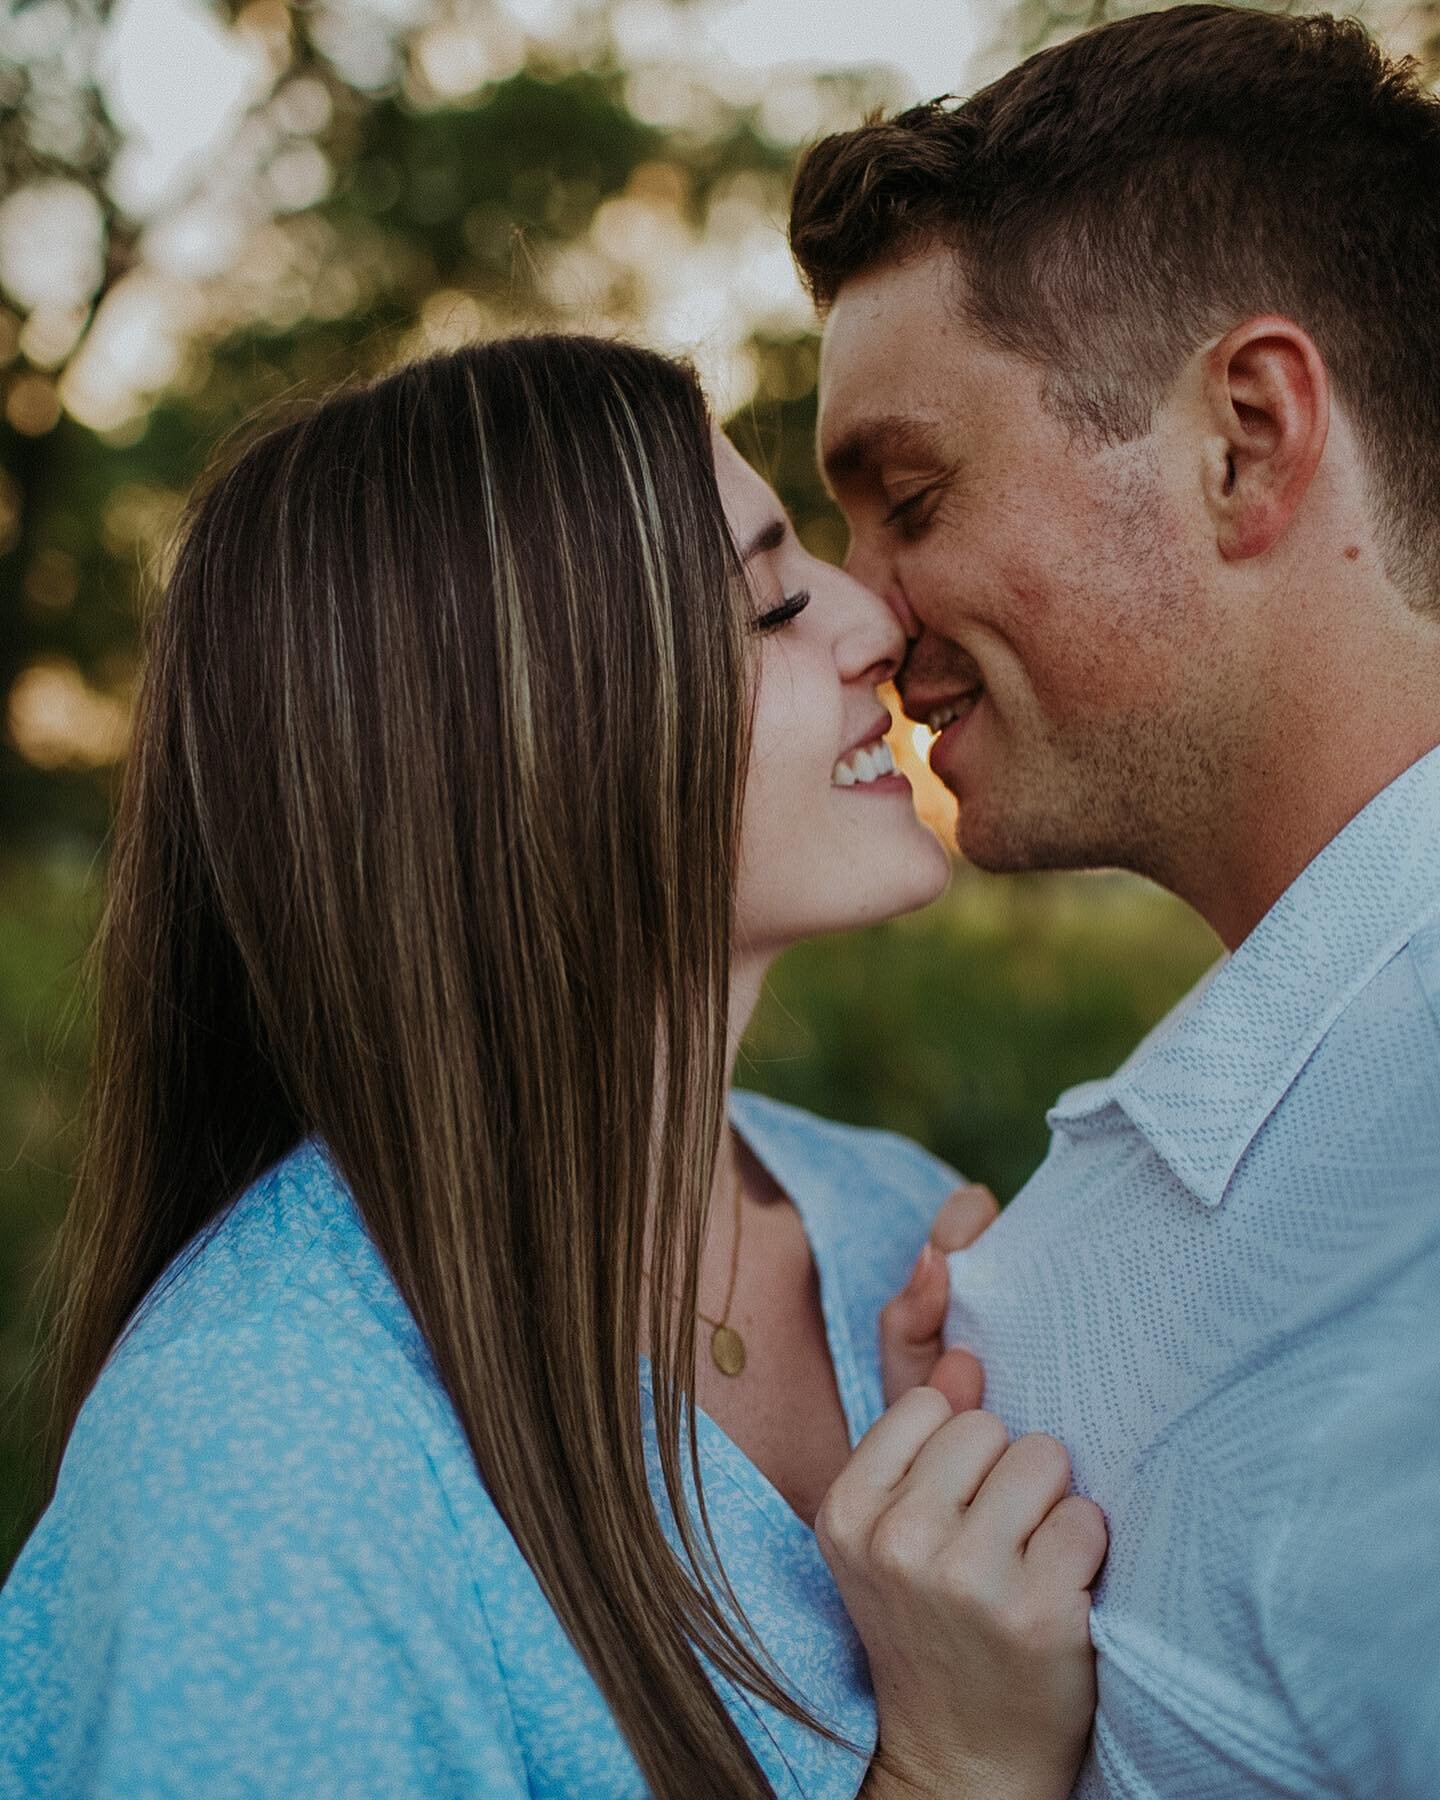 Last night&rsquo;s engagement session and sunset were just perfect!